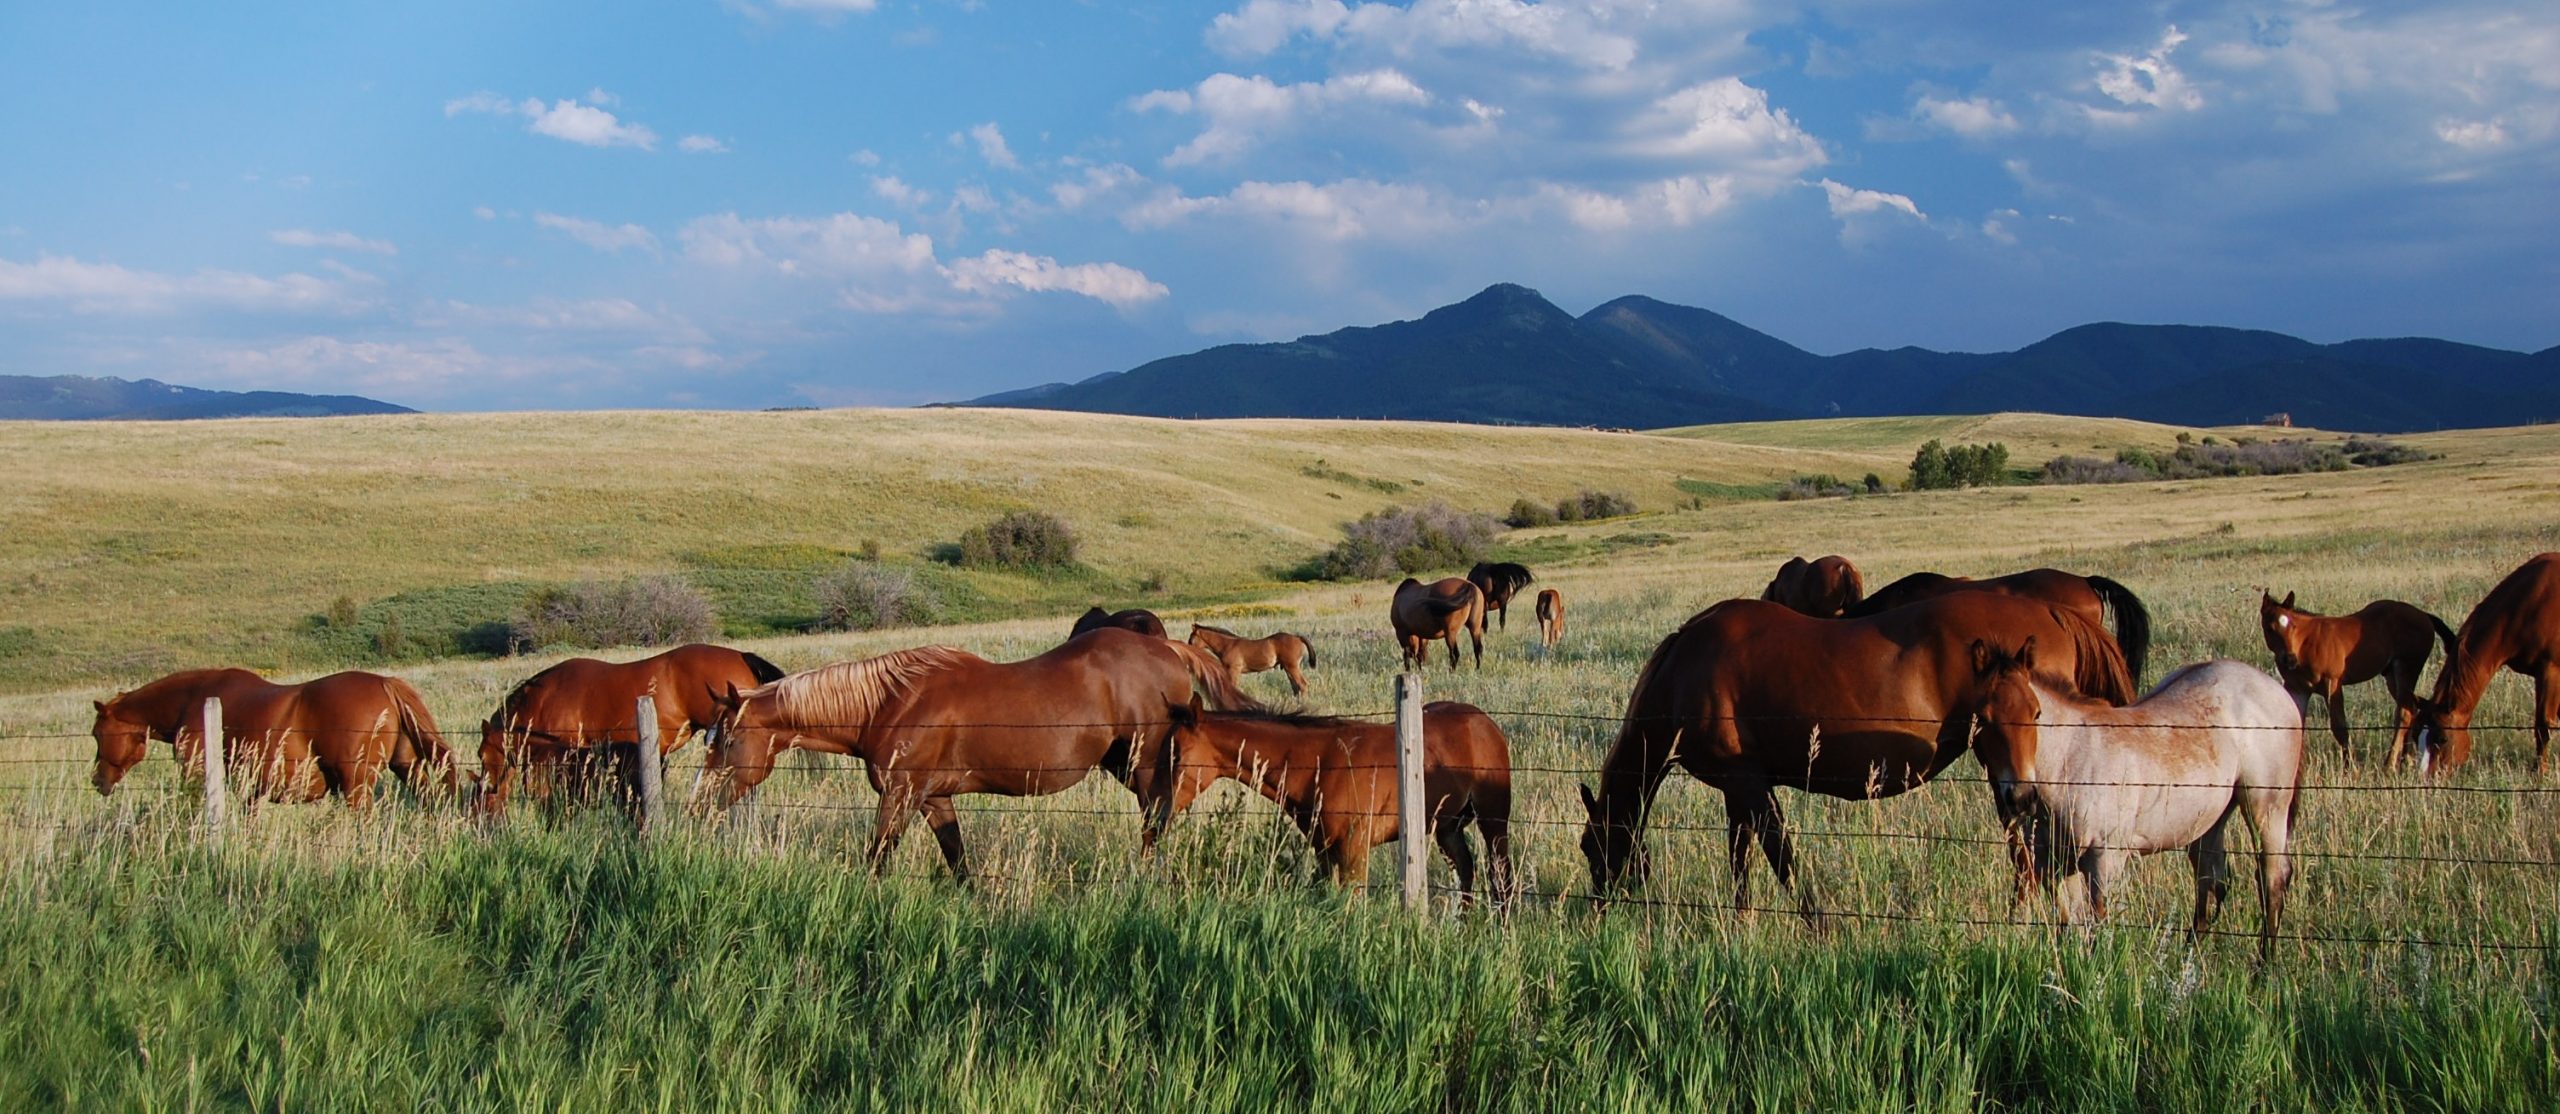 Montana Horse Property Listings $900,000 To $1,000,000